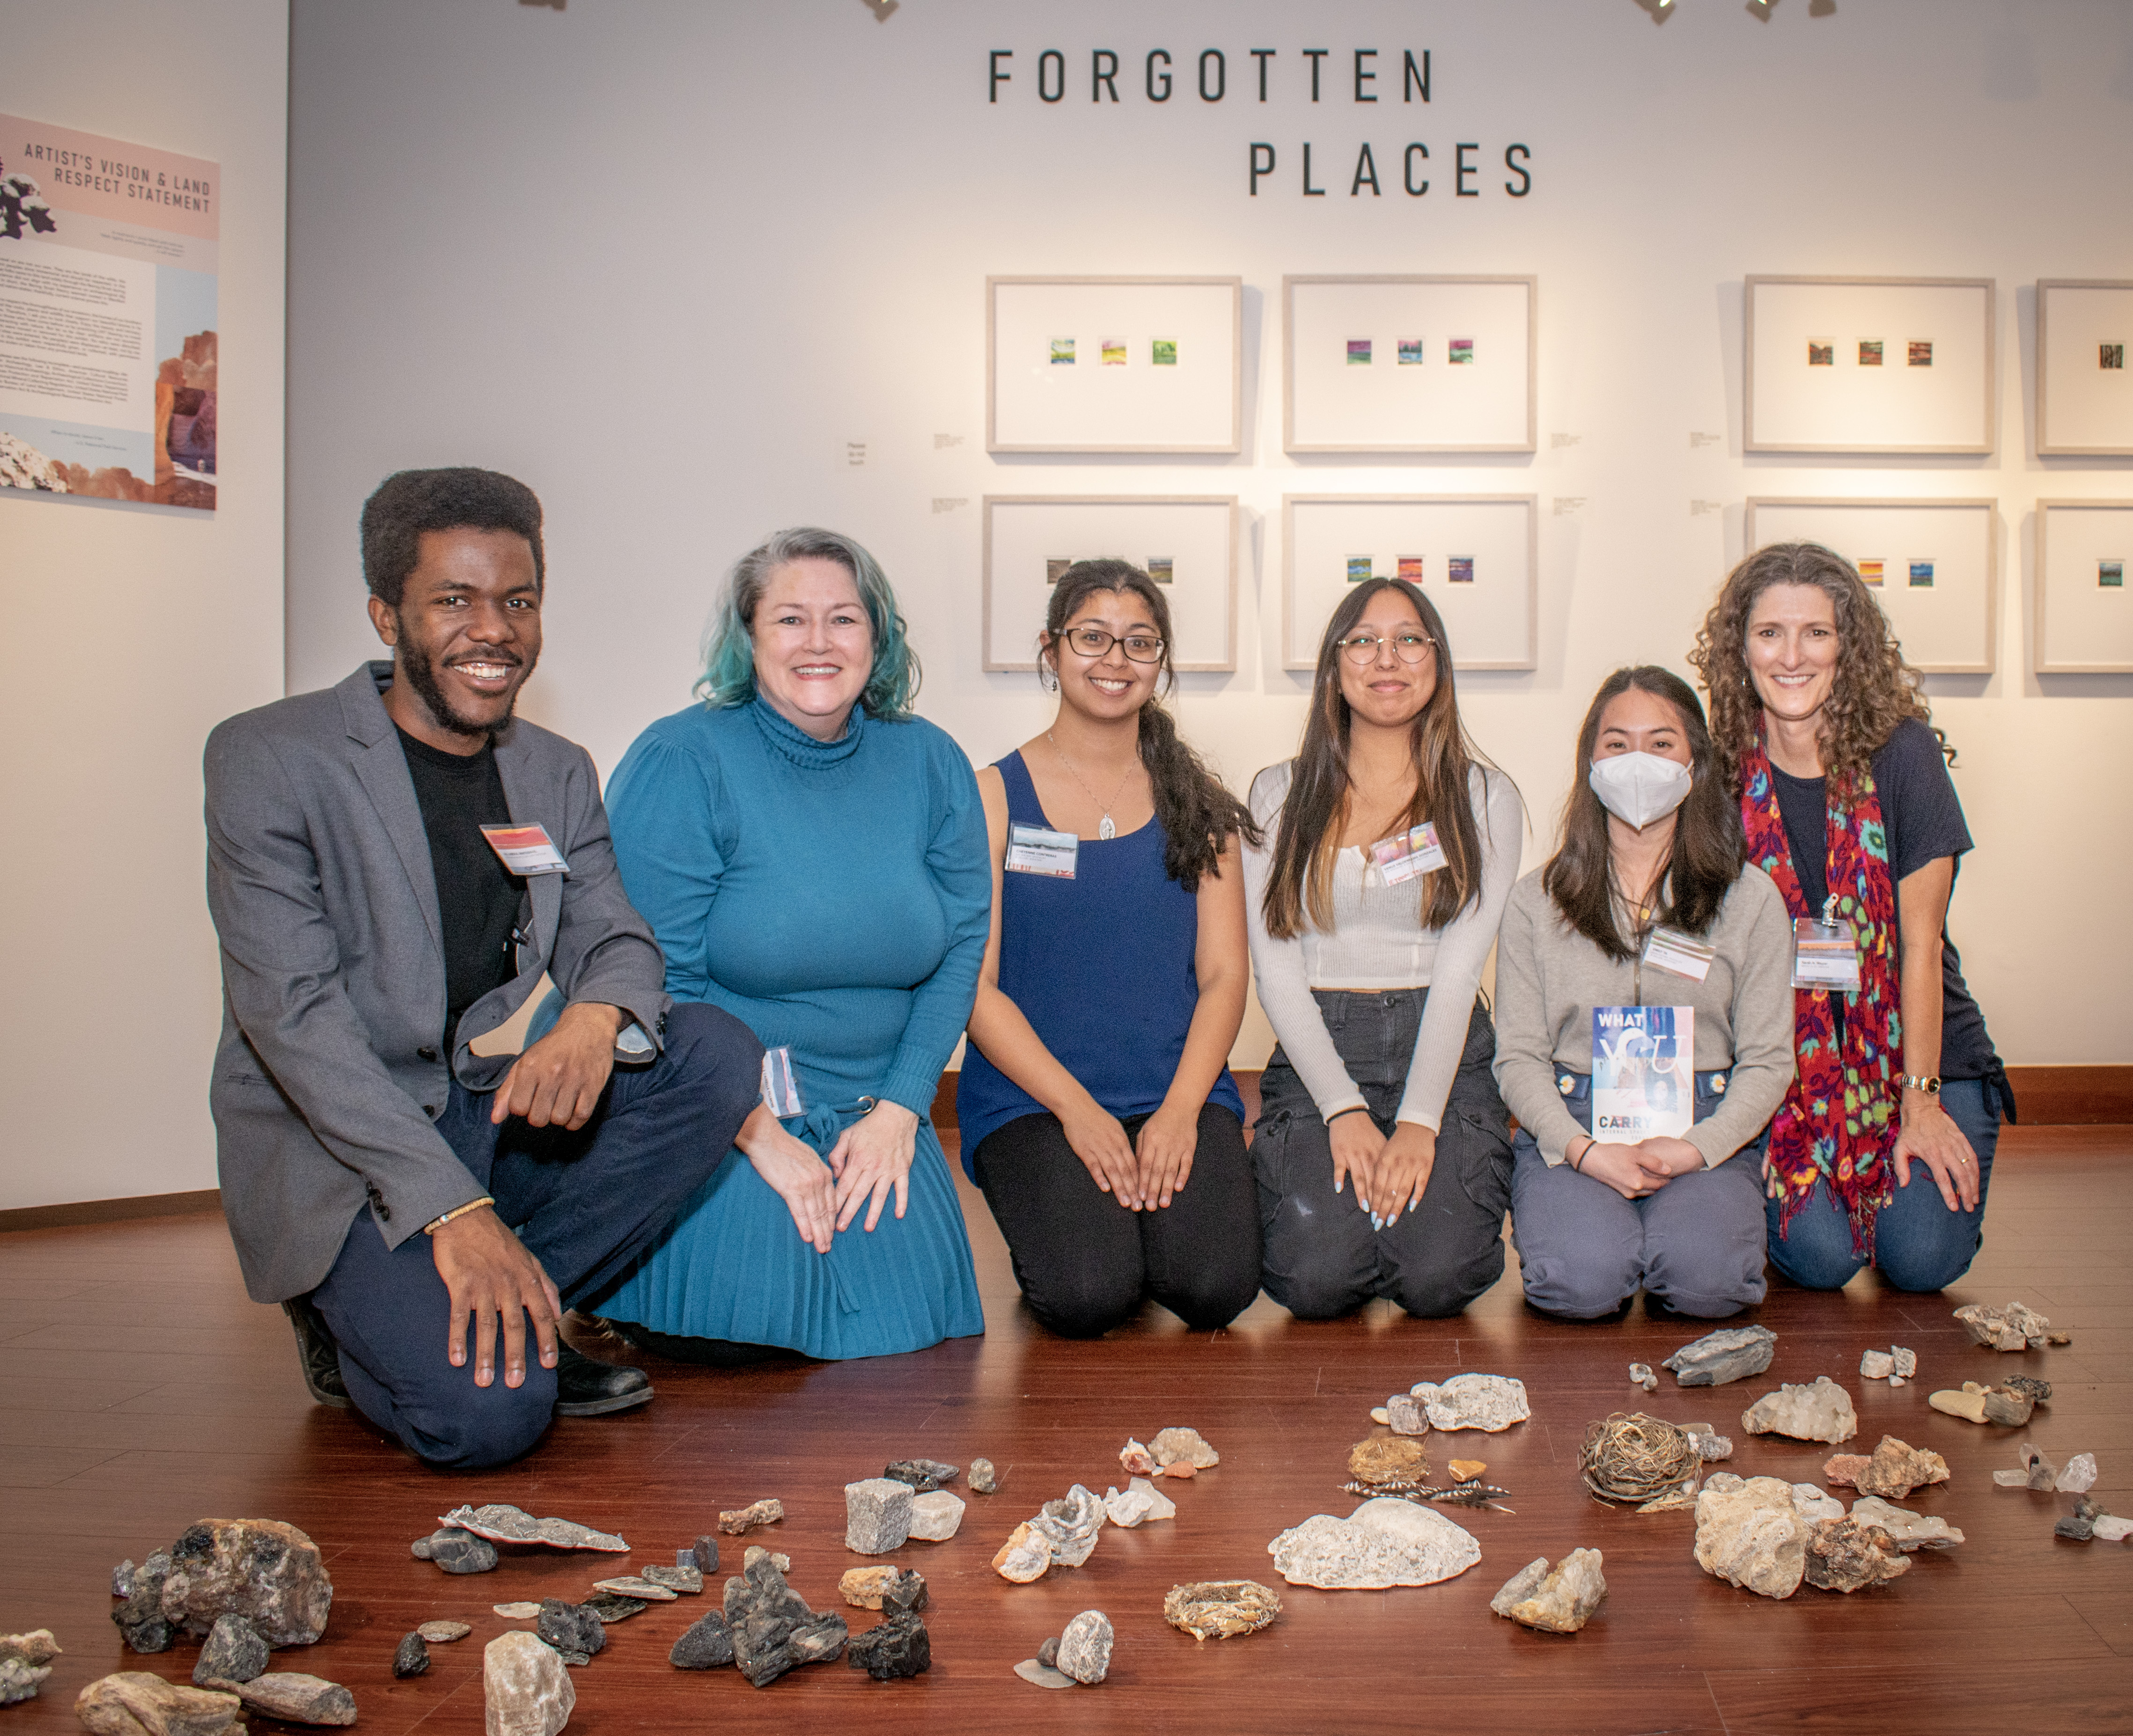 A group photograph that includes Sarah Meyers, and the gallery staff.